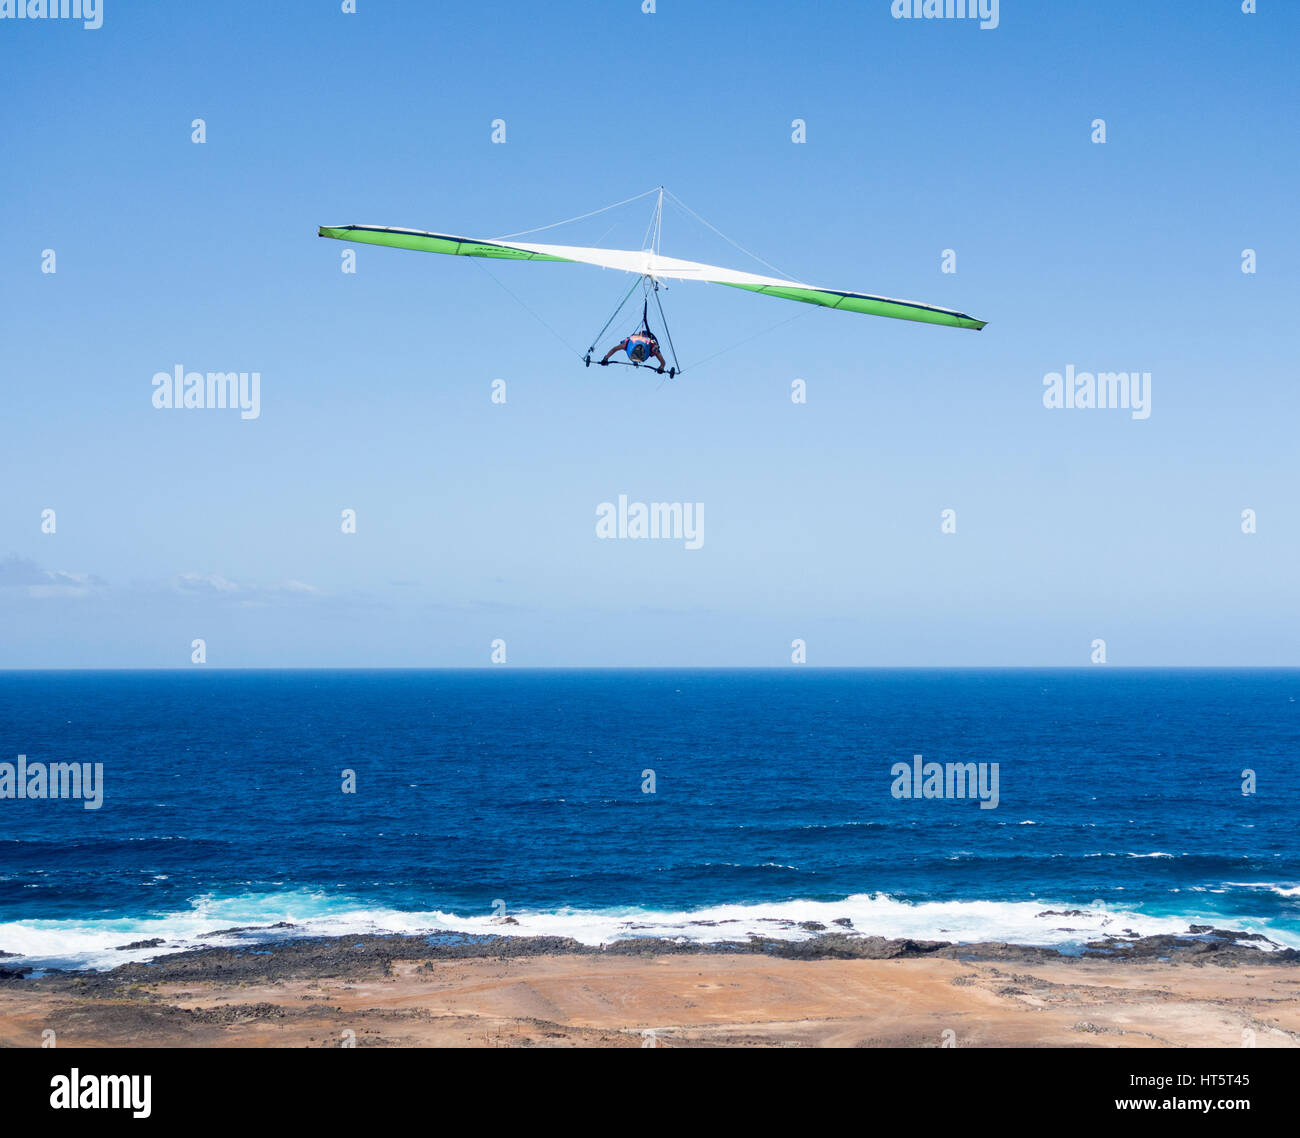 Hang Glider taking off over the Atlantic Ocean in Las Palmas on Gran Canaria, Canary Islands, Spain Stock Photo